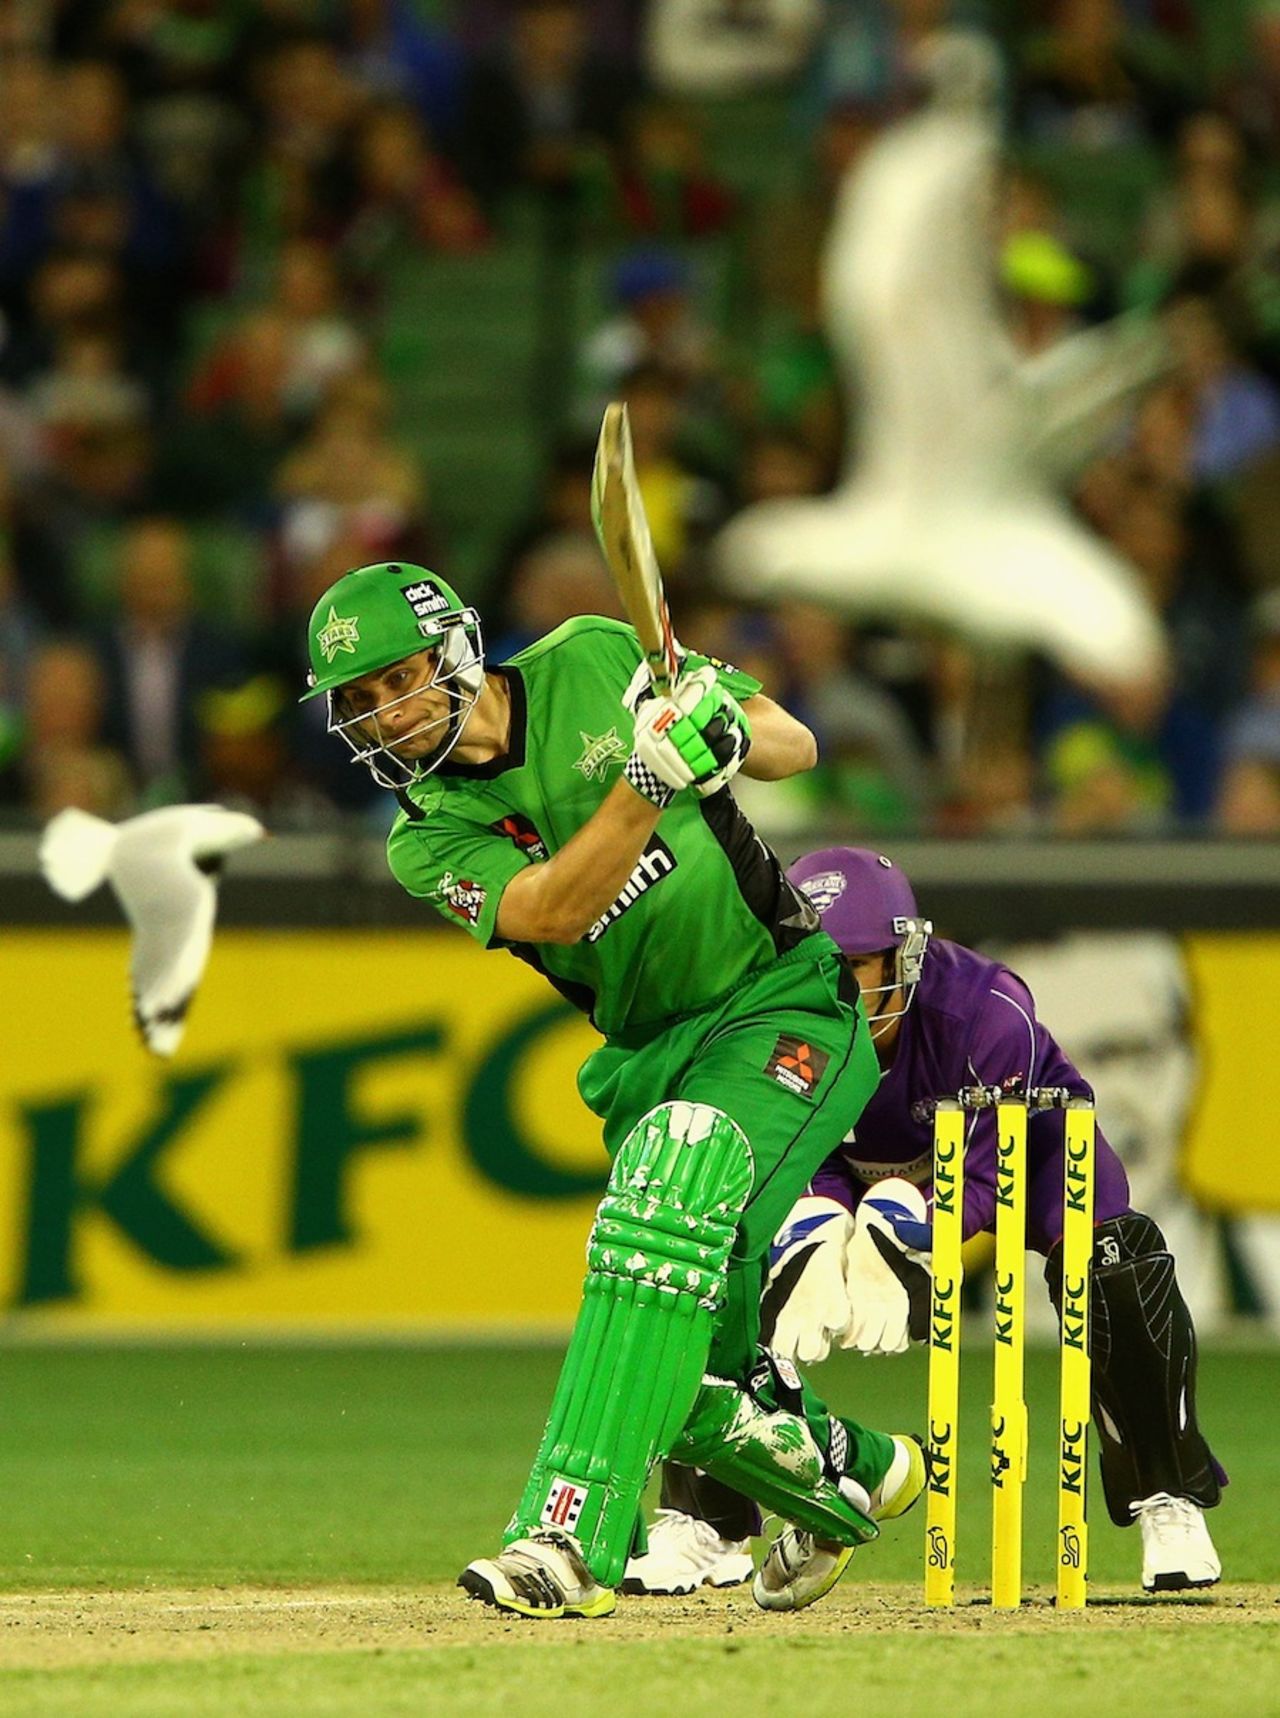 Luke Wright's fifty included five fours and two sixes, Melbourne Stars v Hobart Hurricanes, Big Bash League, Melbourne, January 21, 2014